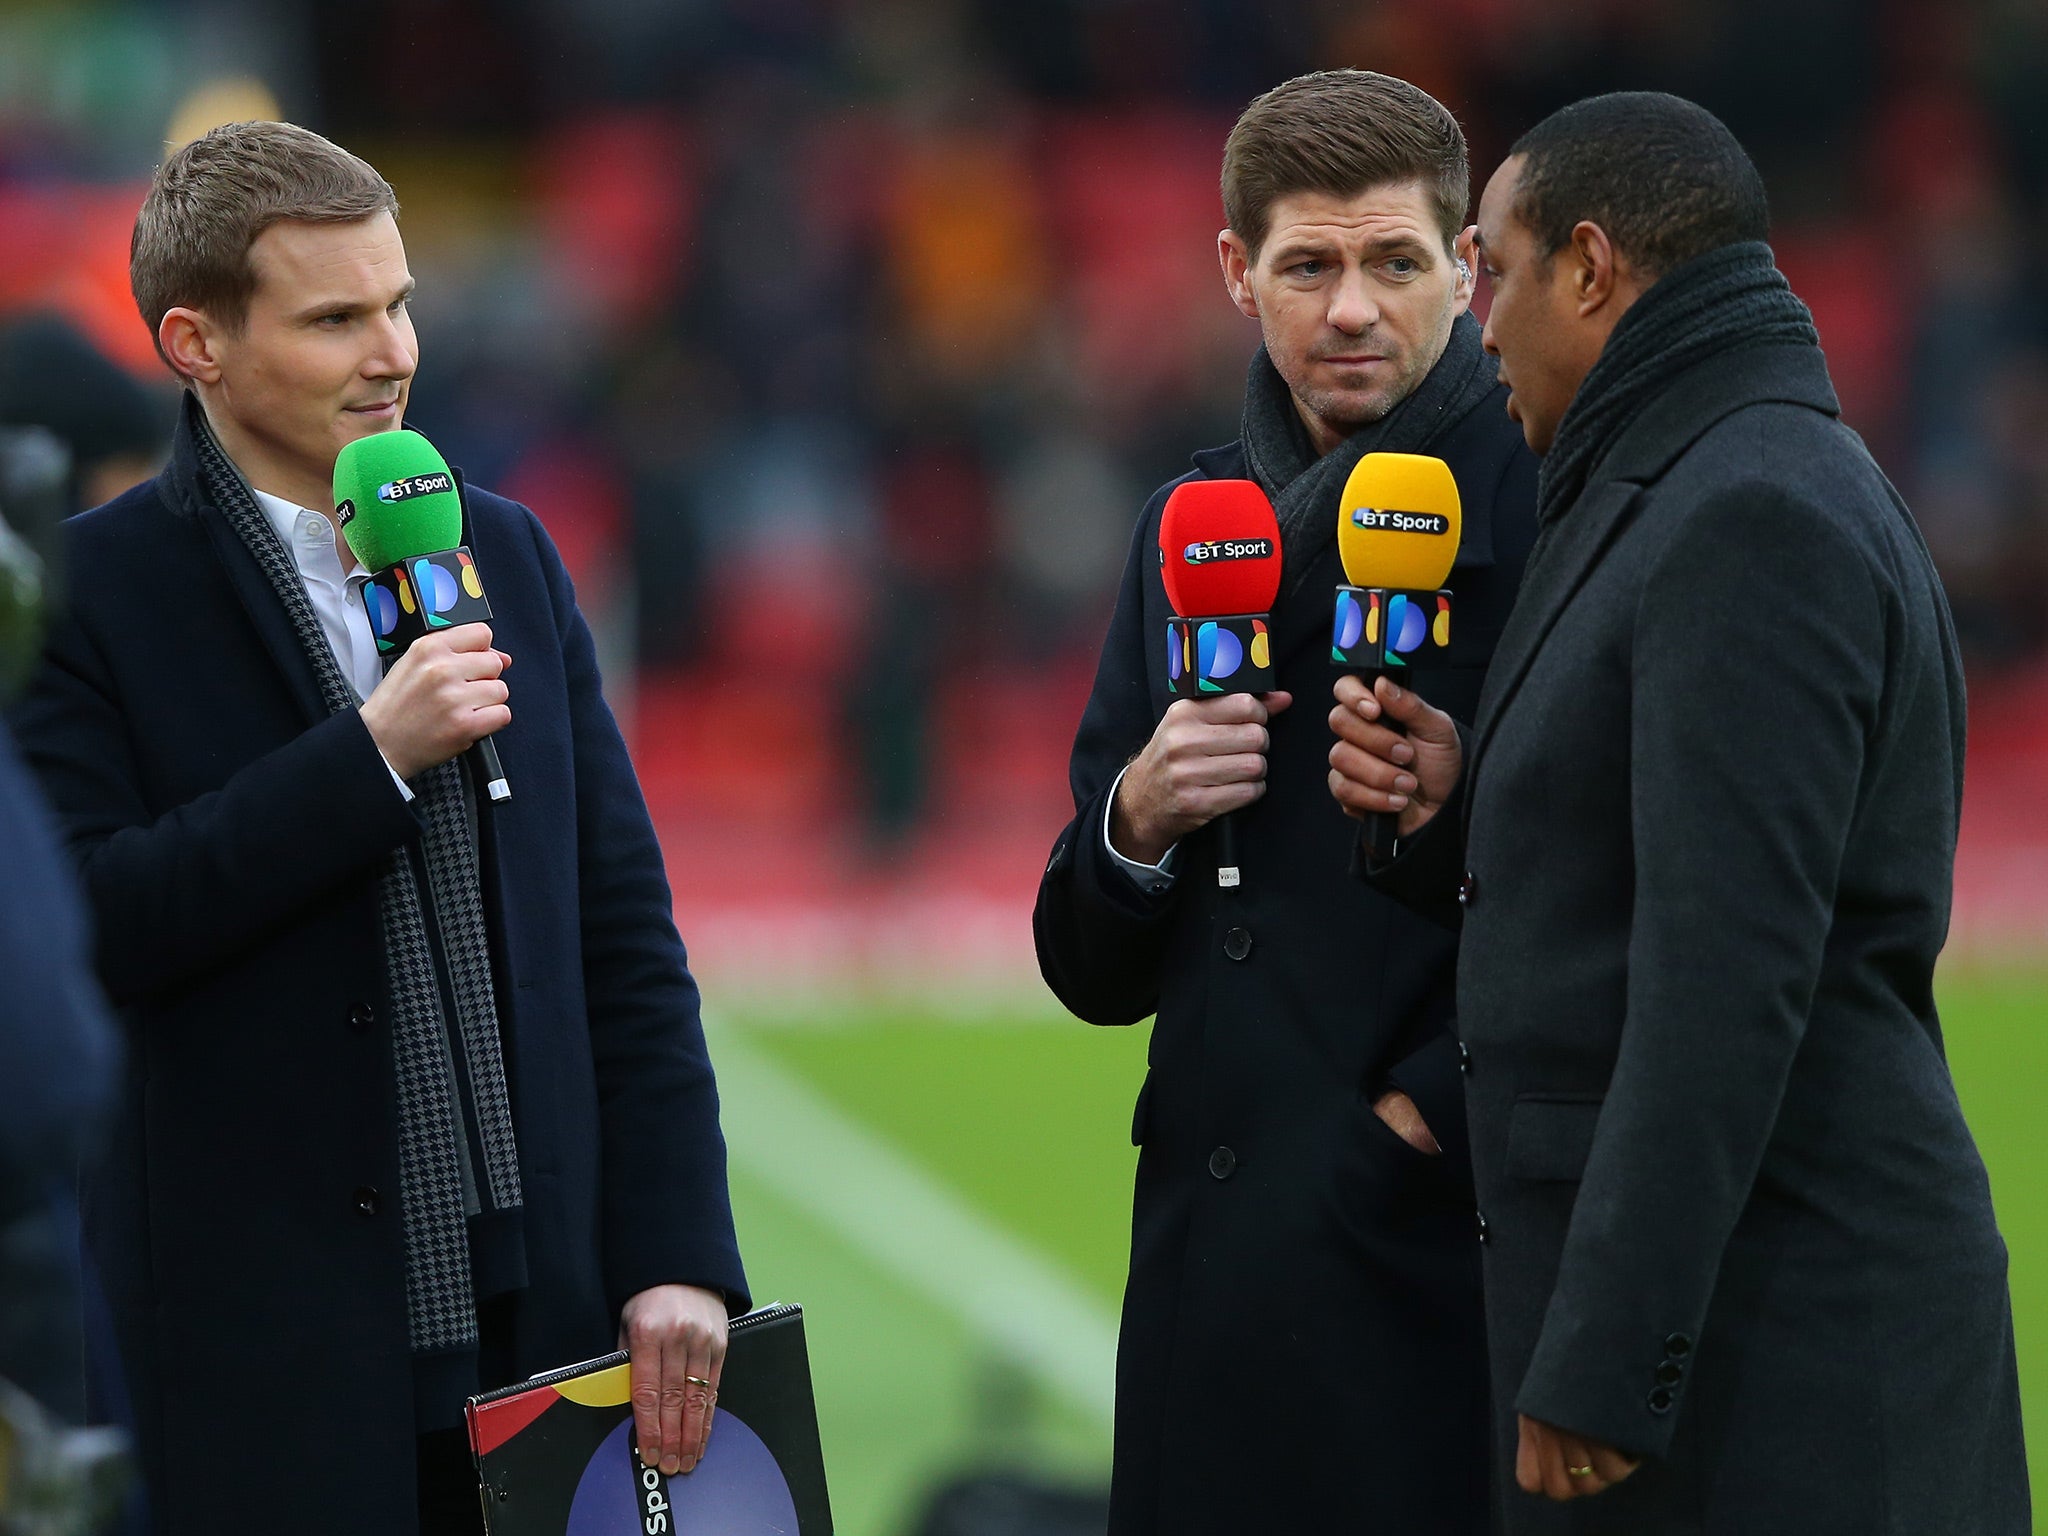 Steven Gerrard also highlighted Sadio Mane's absence as a key reason behind Liverpool's poor form